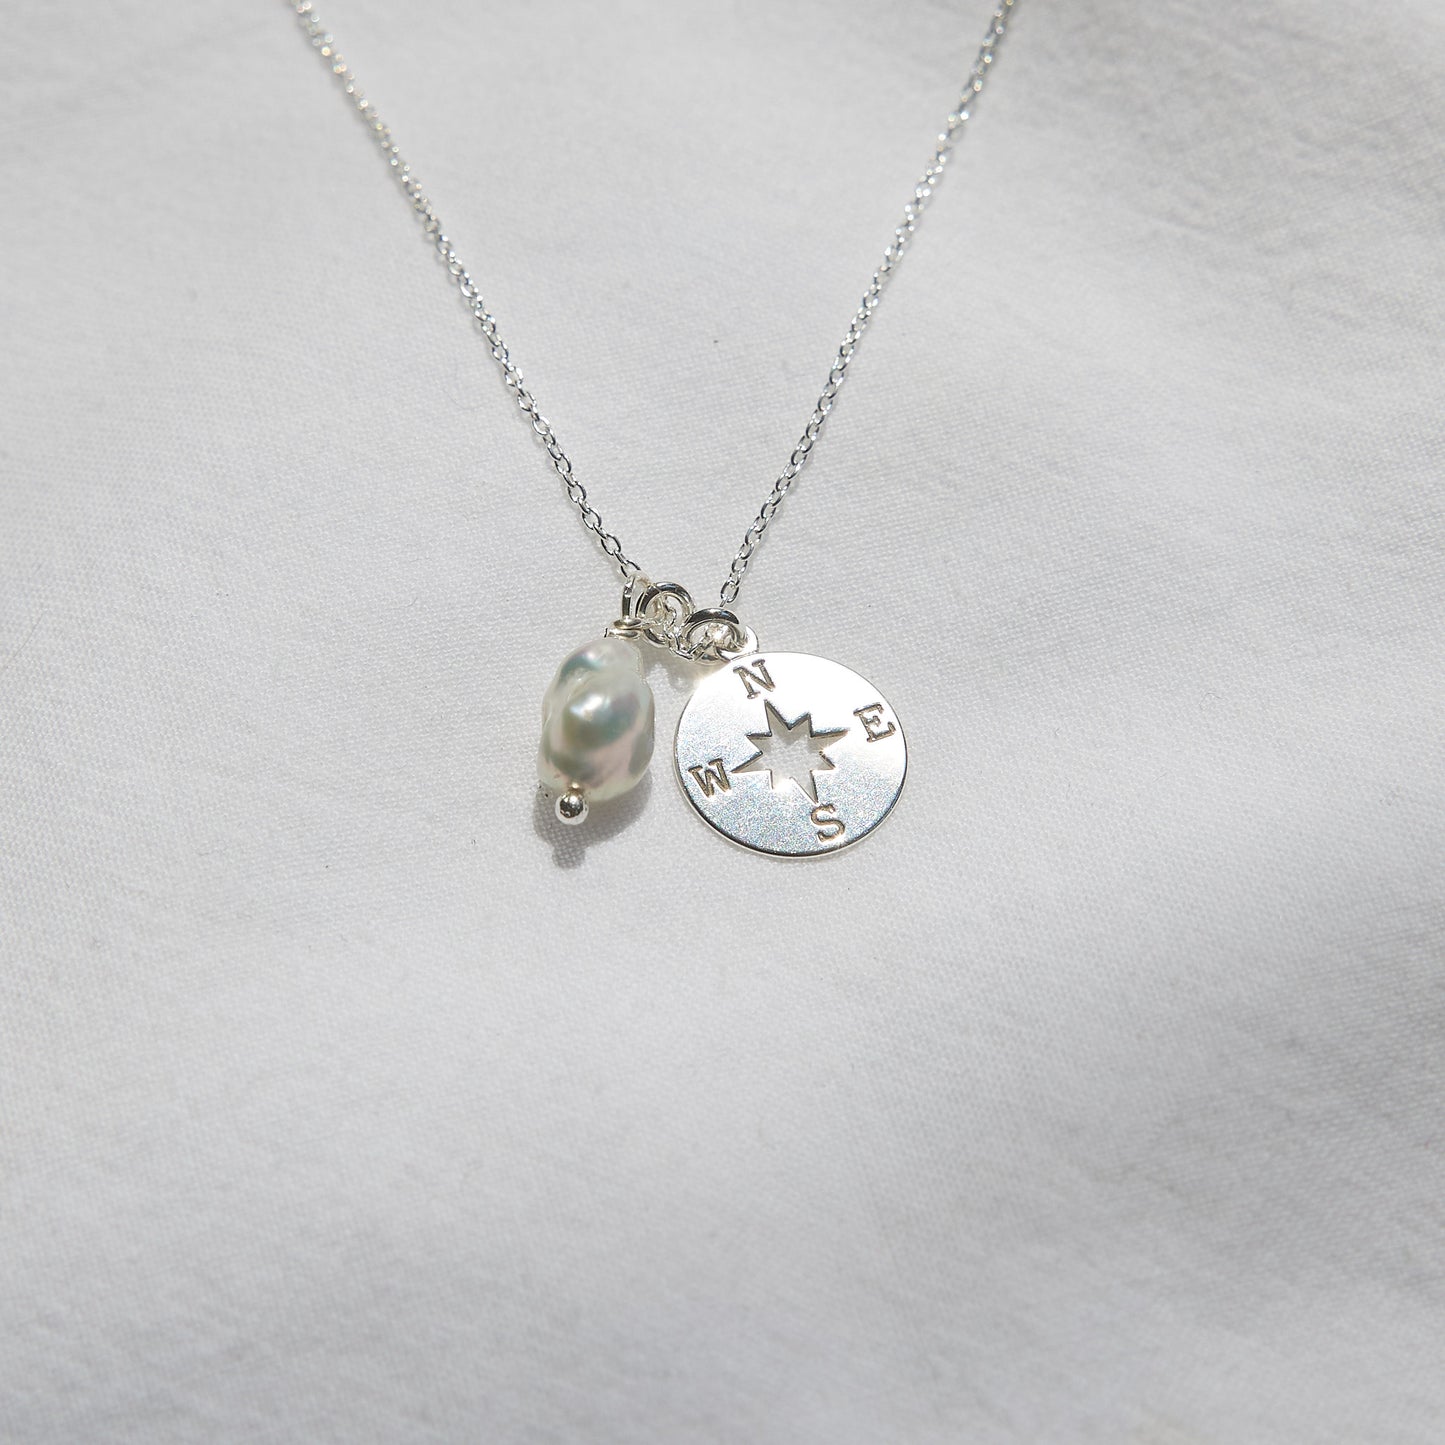 Compass and Pearl Necklace sterling silver